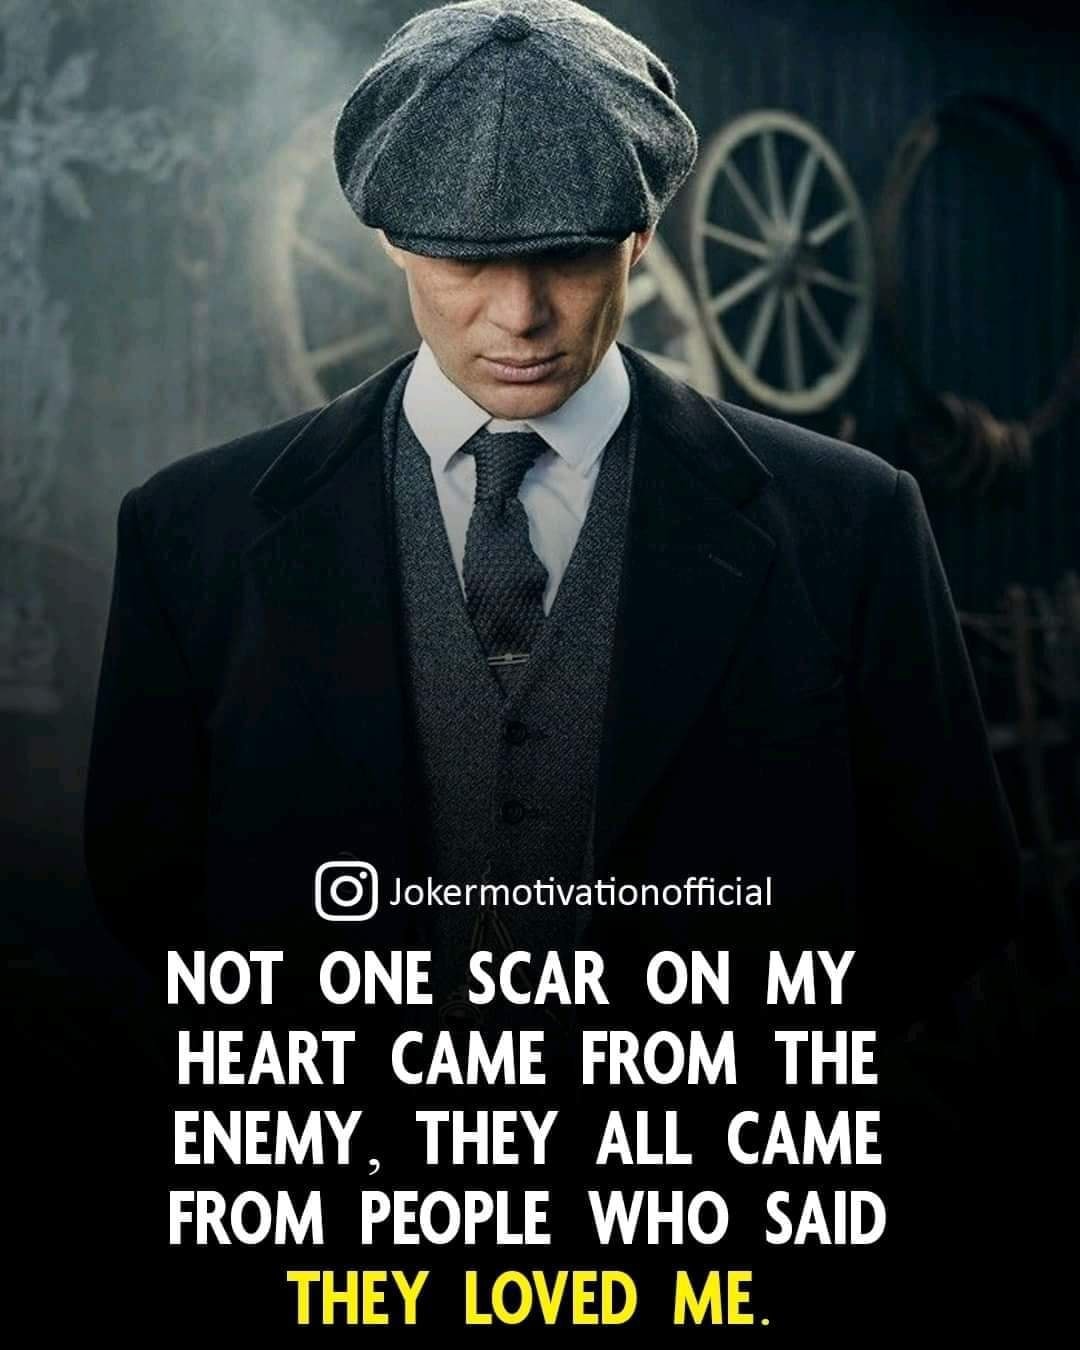 Not one scar on my heart came from an enemy. They all came from people who “LOVED” me.